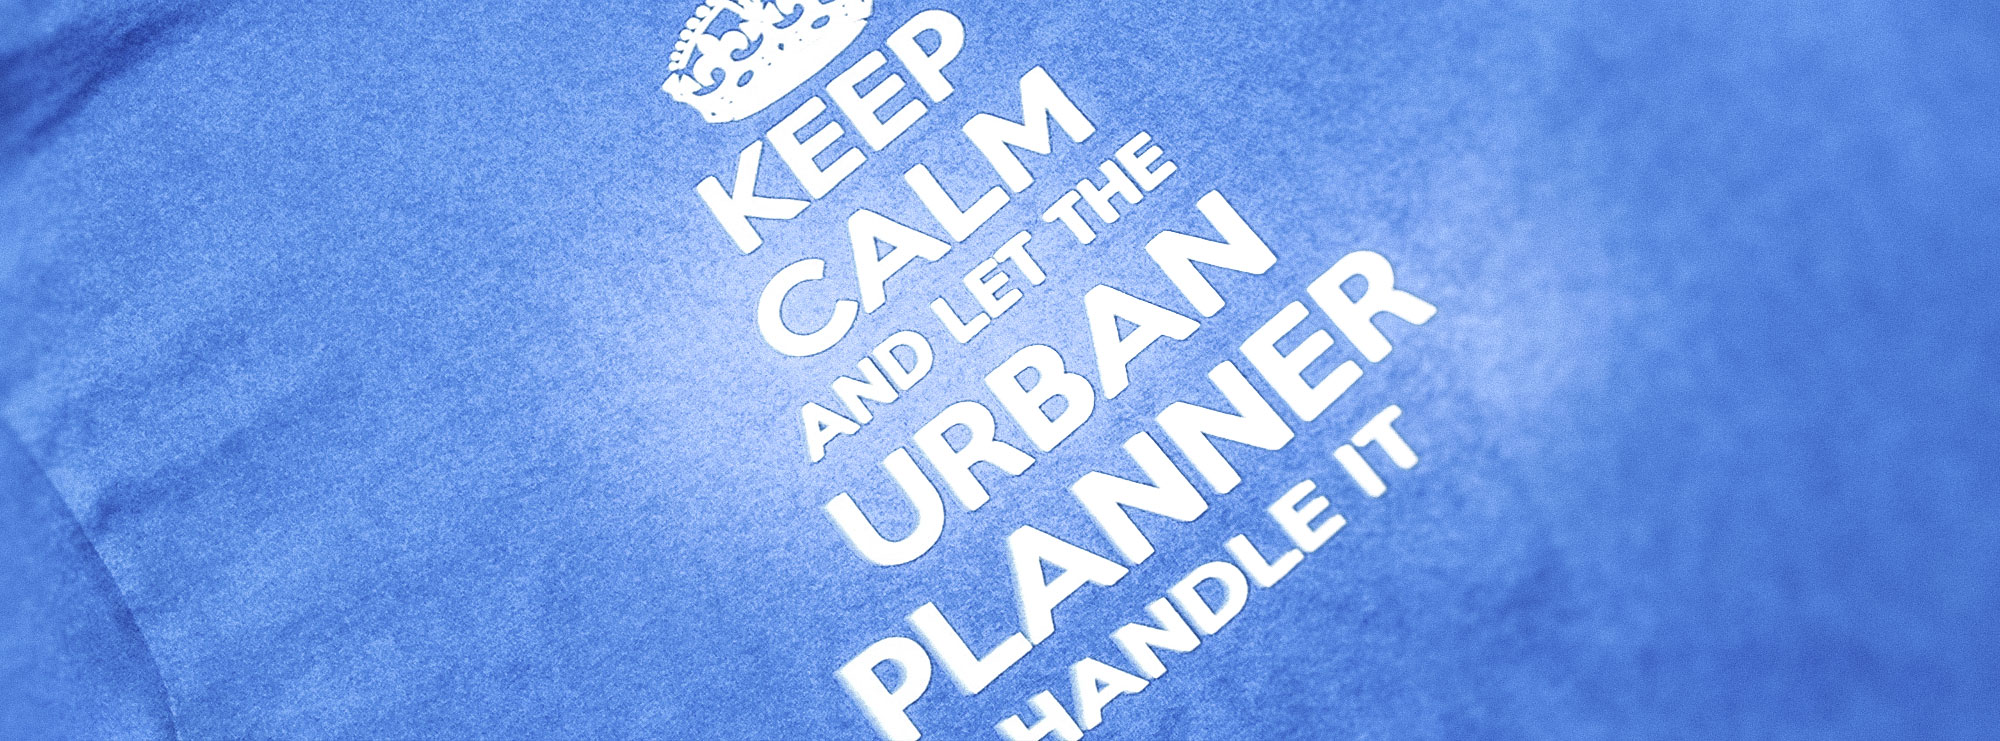 Let the urban planner handle it